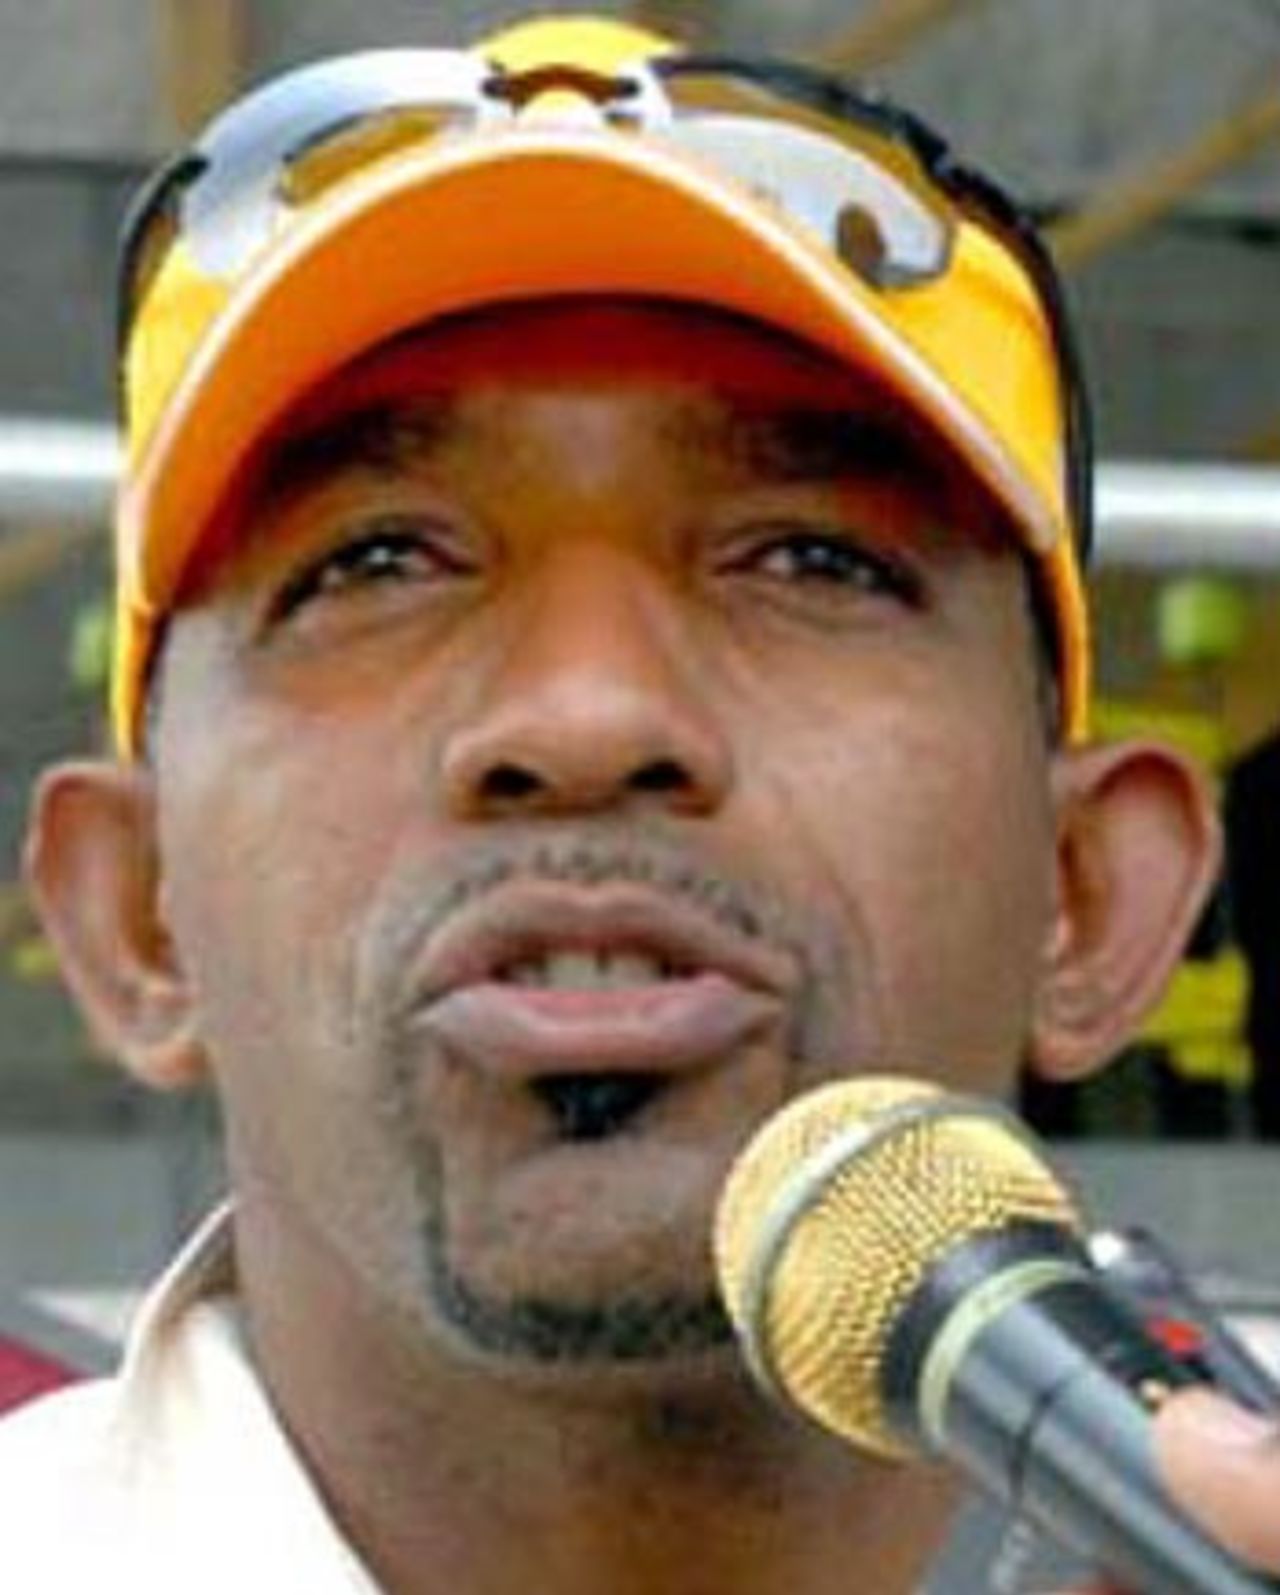 Phil Simmons faces the media in Trinidad, May 12, 2006